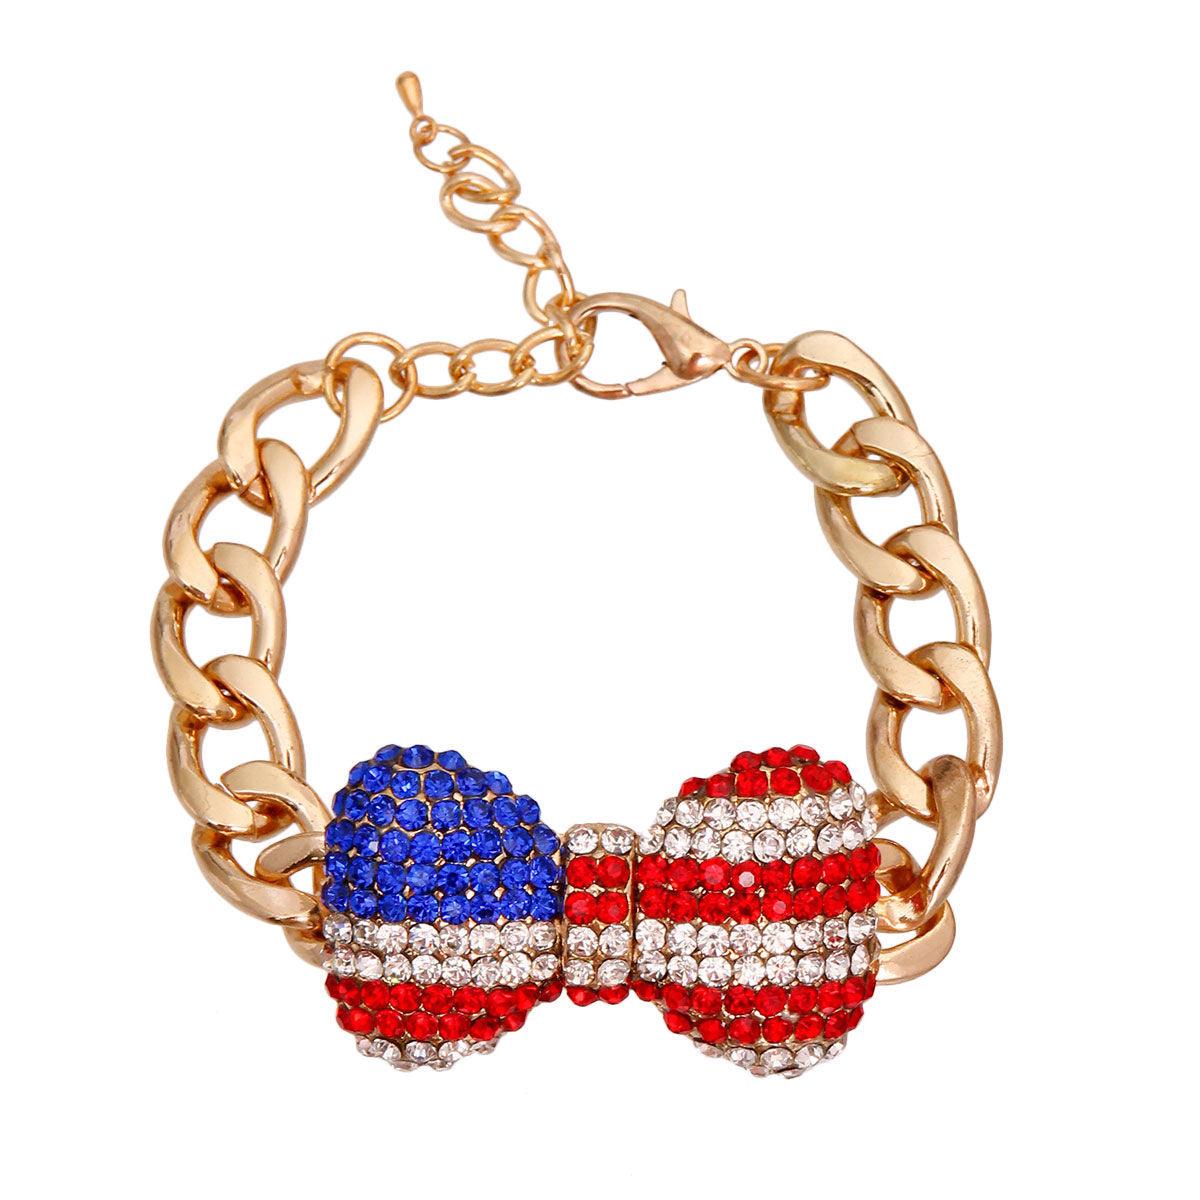 Bracelet with a Patriotic Bow and Gold Tone Chain